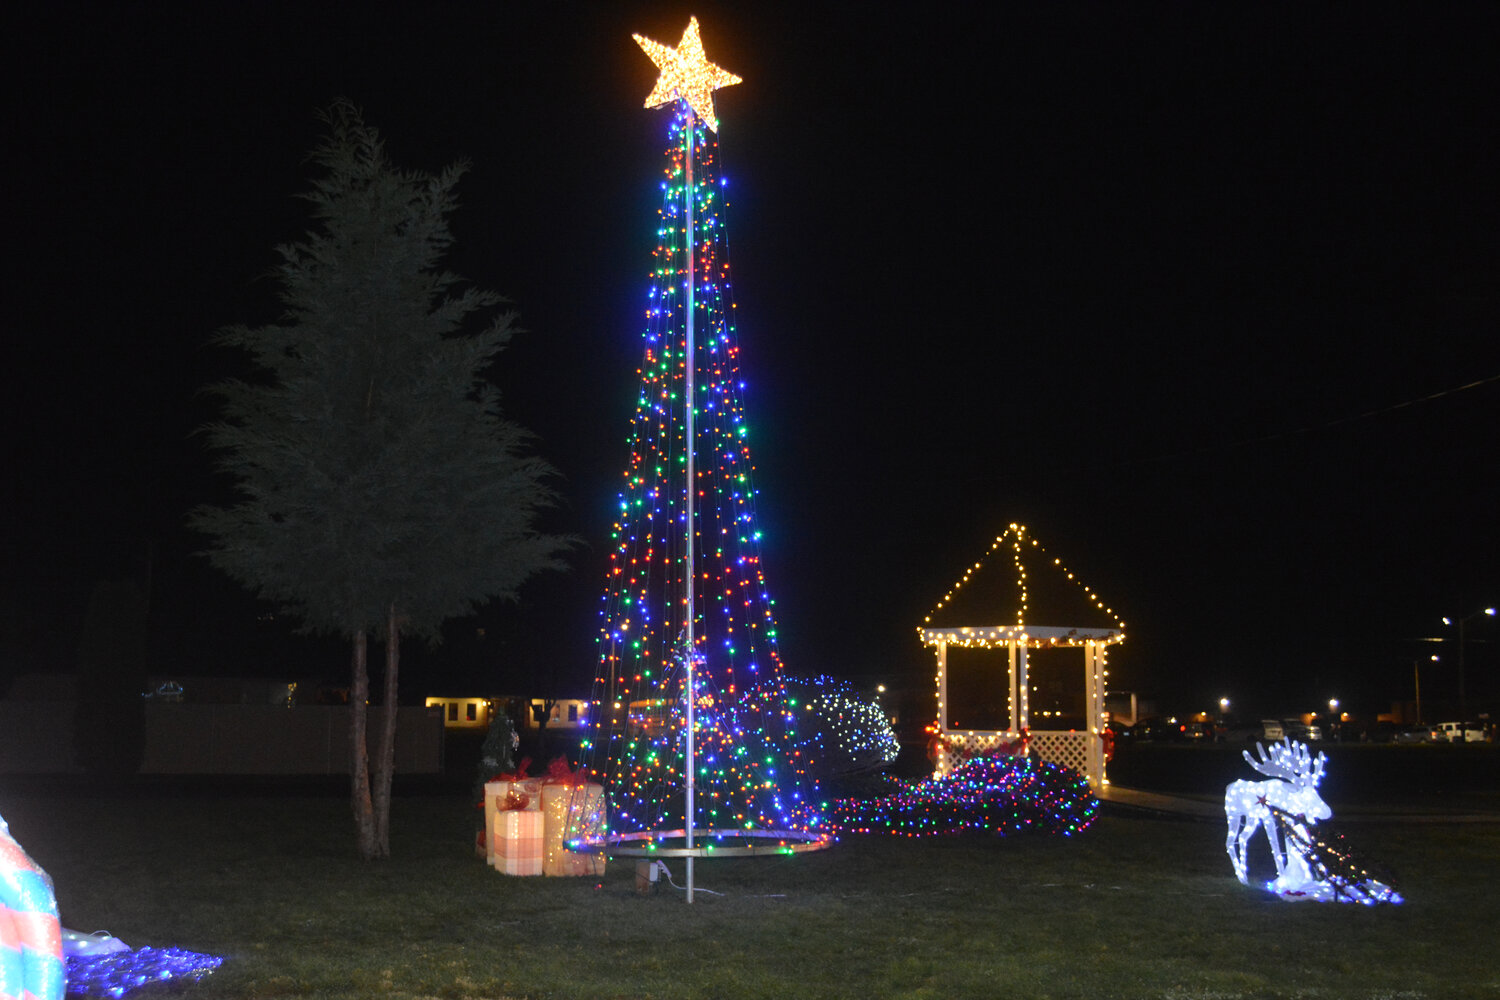 A look at the Christmas tree in Rainier's Holiday Park on Dec. 2.